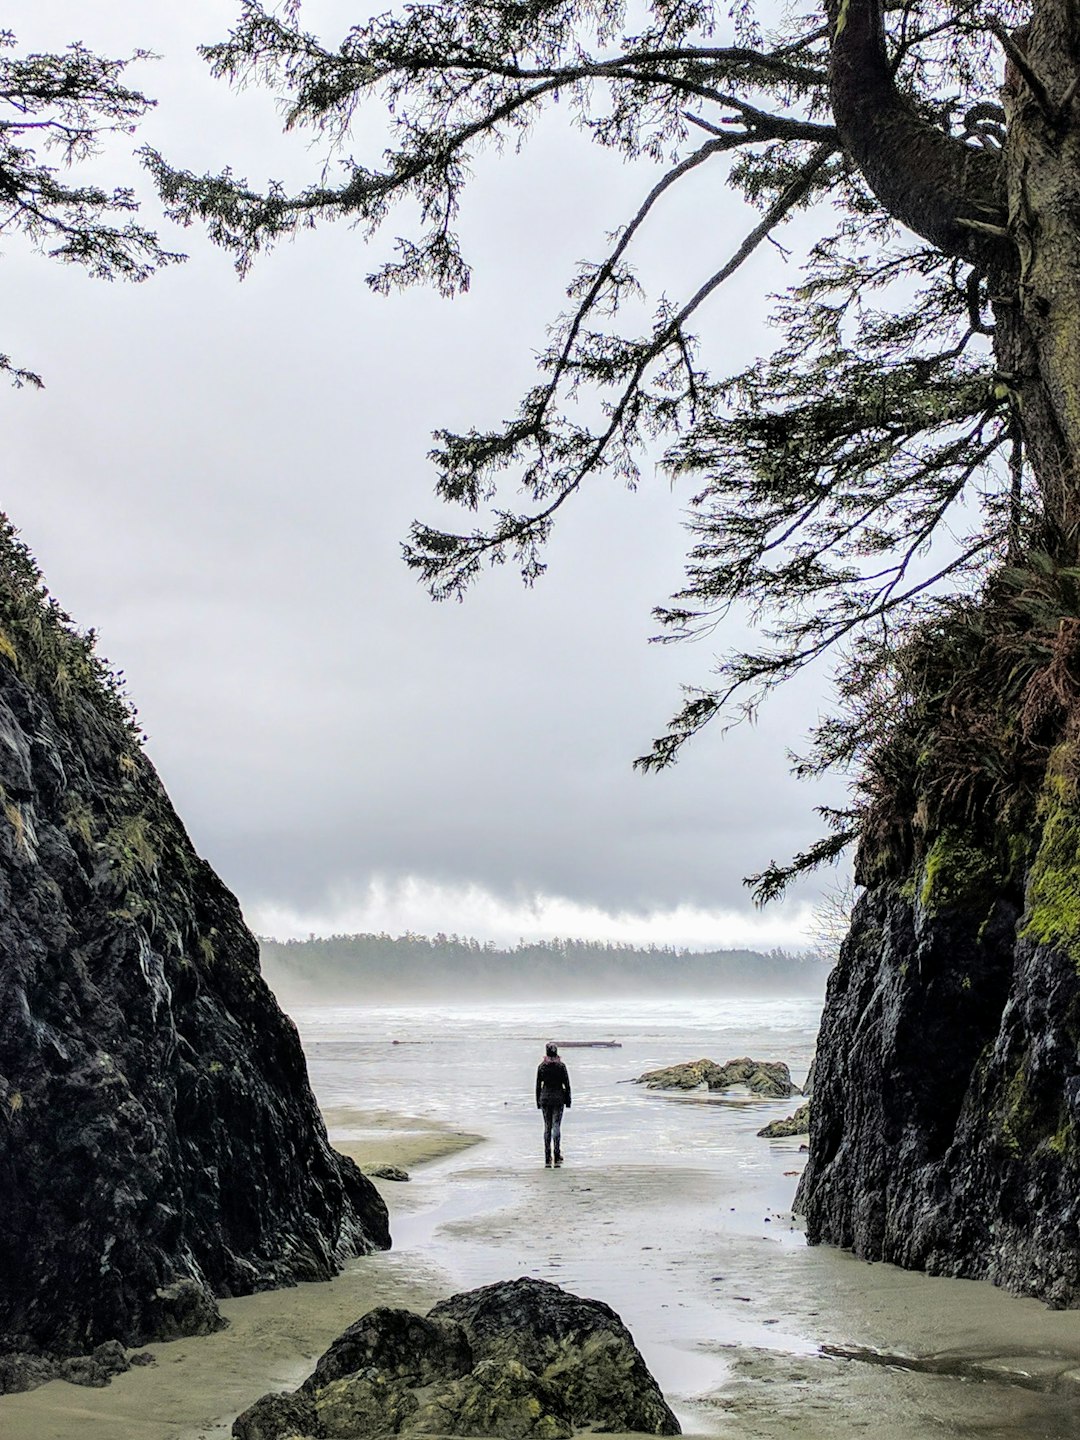 Travel Tips and Stories of Tofino in Canada